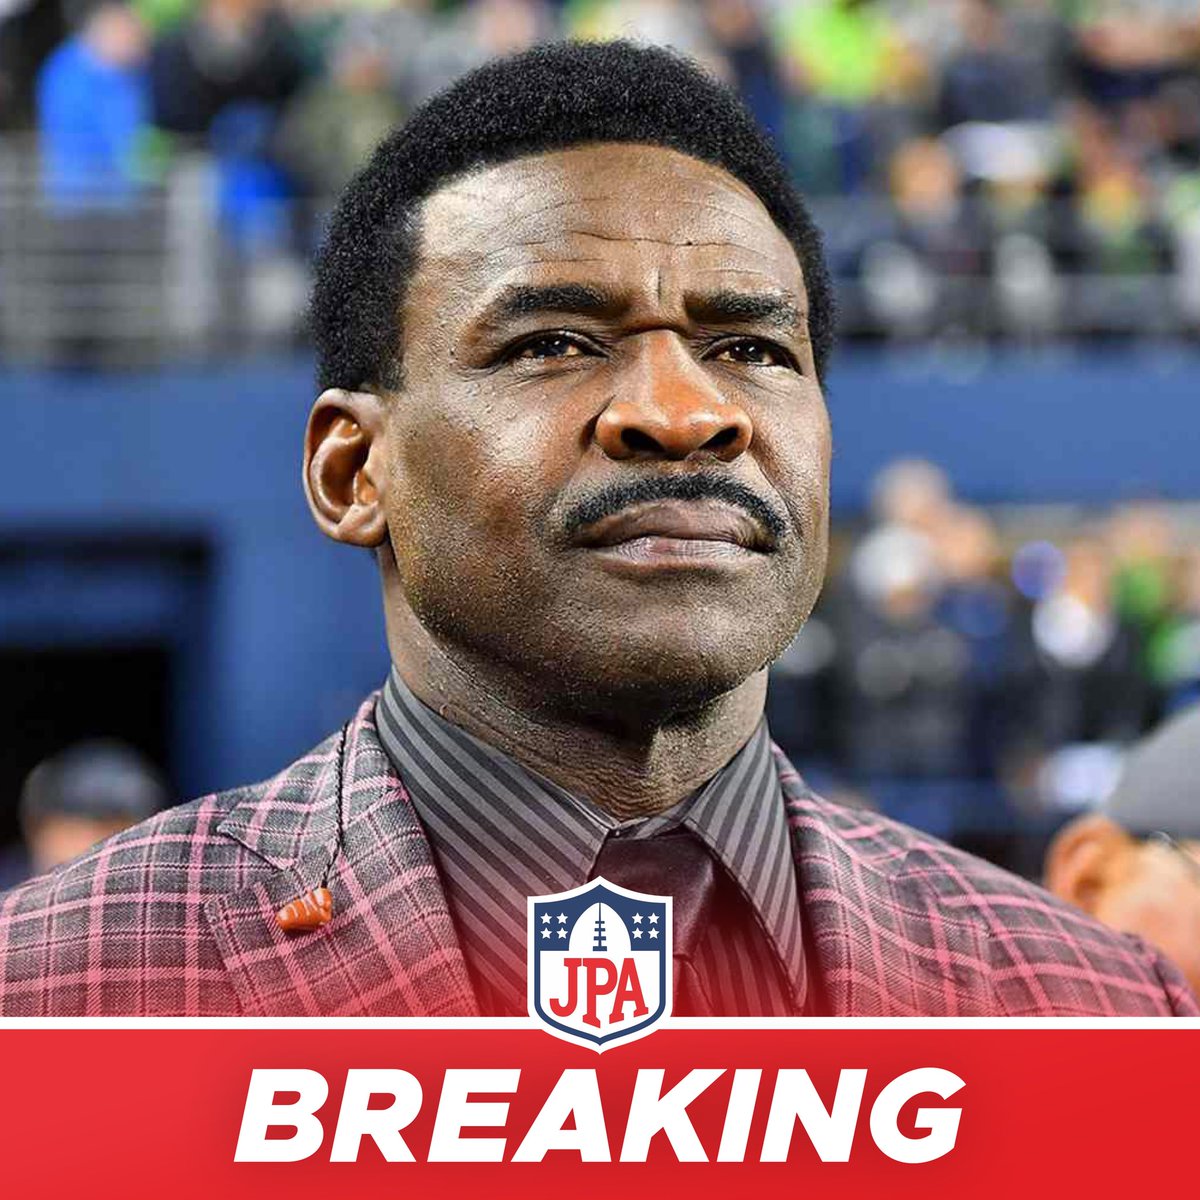 𝗕𝗥𝗘𝗔𝗞𝗜𝗡𝗚: Michael Irvin has been let go from NFL Network after 20+ years with the company.